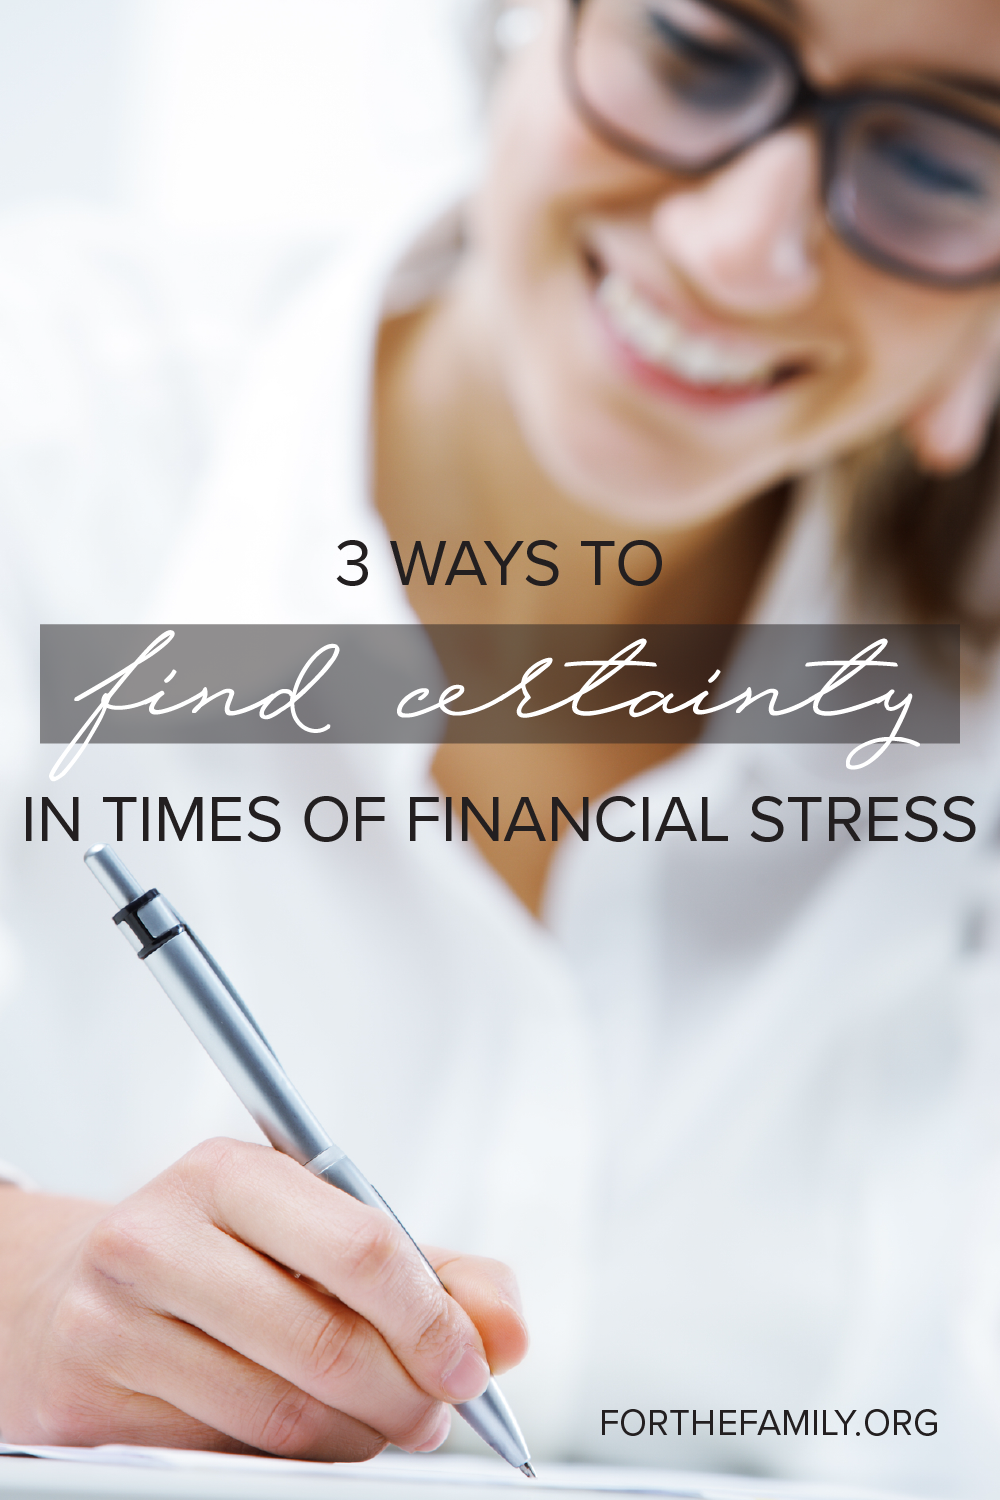 3 Ways to Find Certainty in Times of Financial Stress